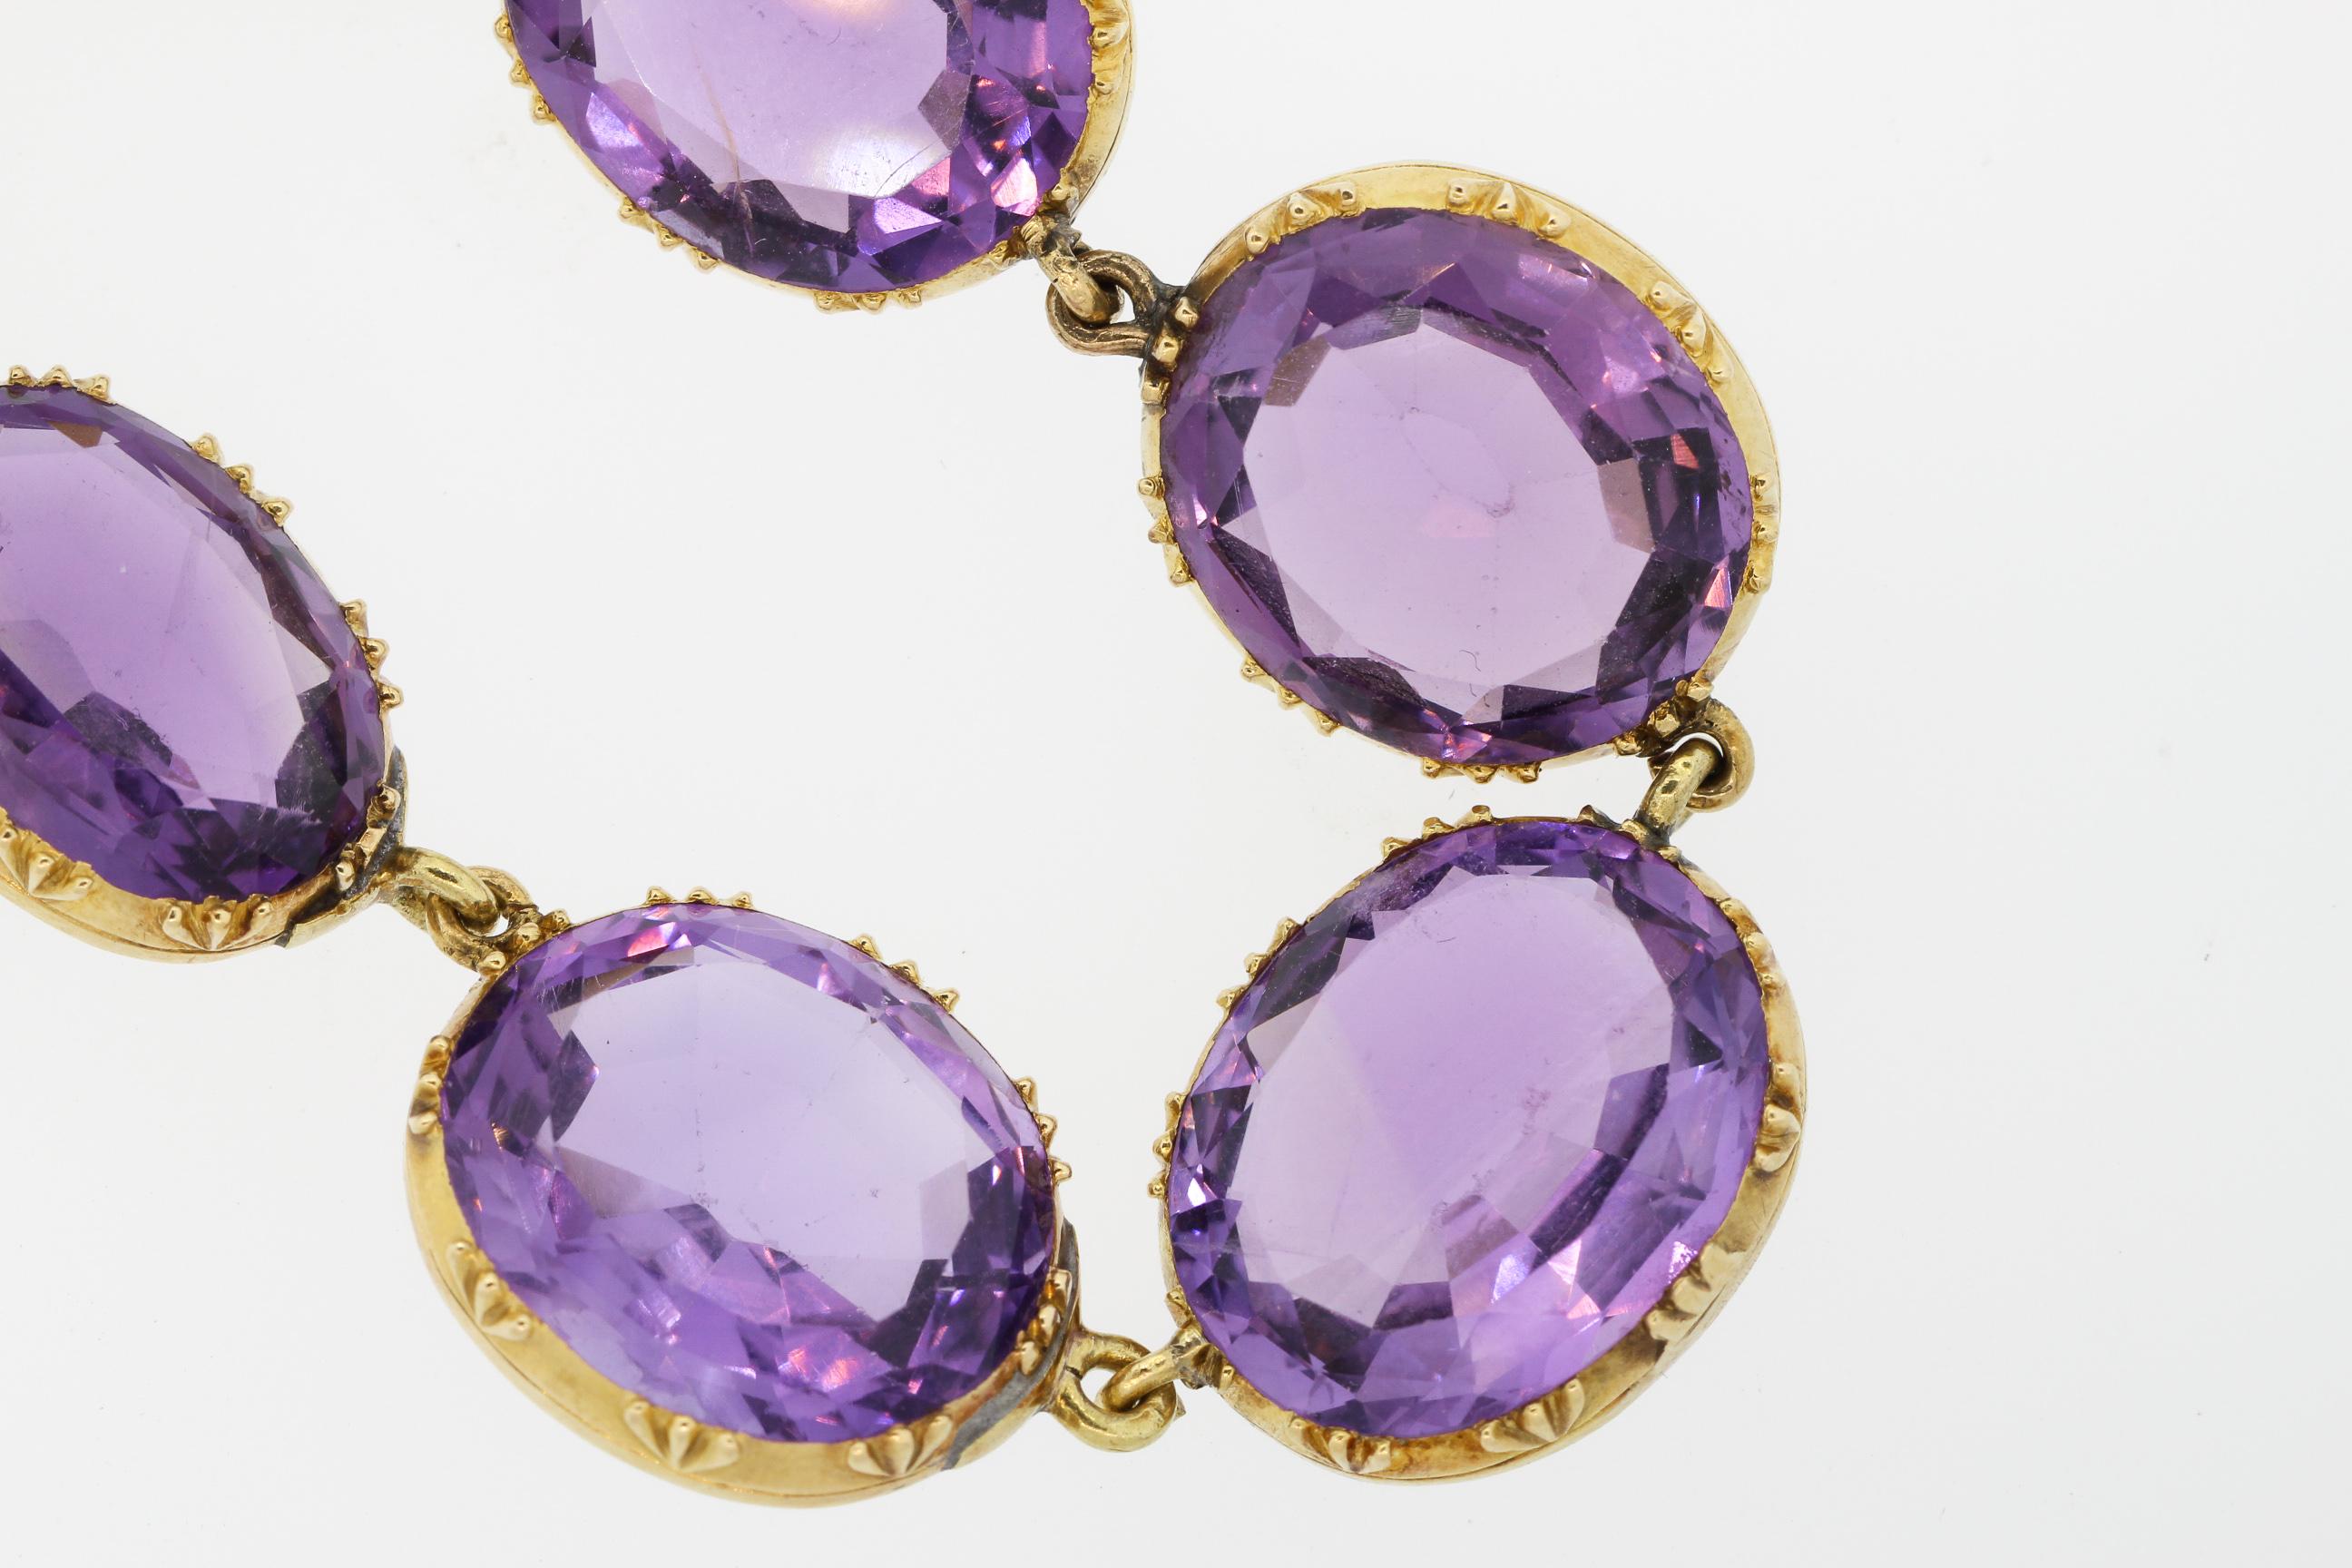 Antique 14k yellow gold collet set amethyst riviere necklace circa 1880. This nicely colored amethyst necklace is open backed, as opposed to the Georgian style closed back necklaces. The oval amethysts are a bright purple color, with depth of color